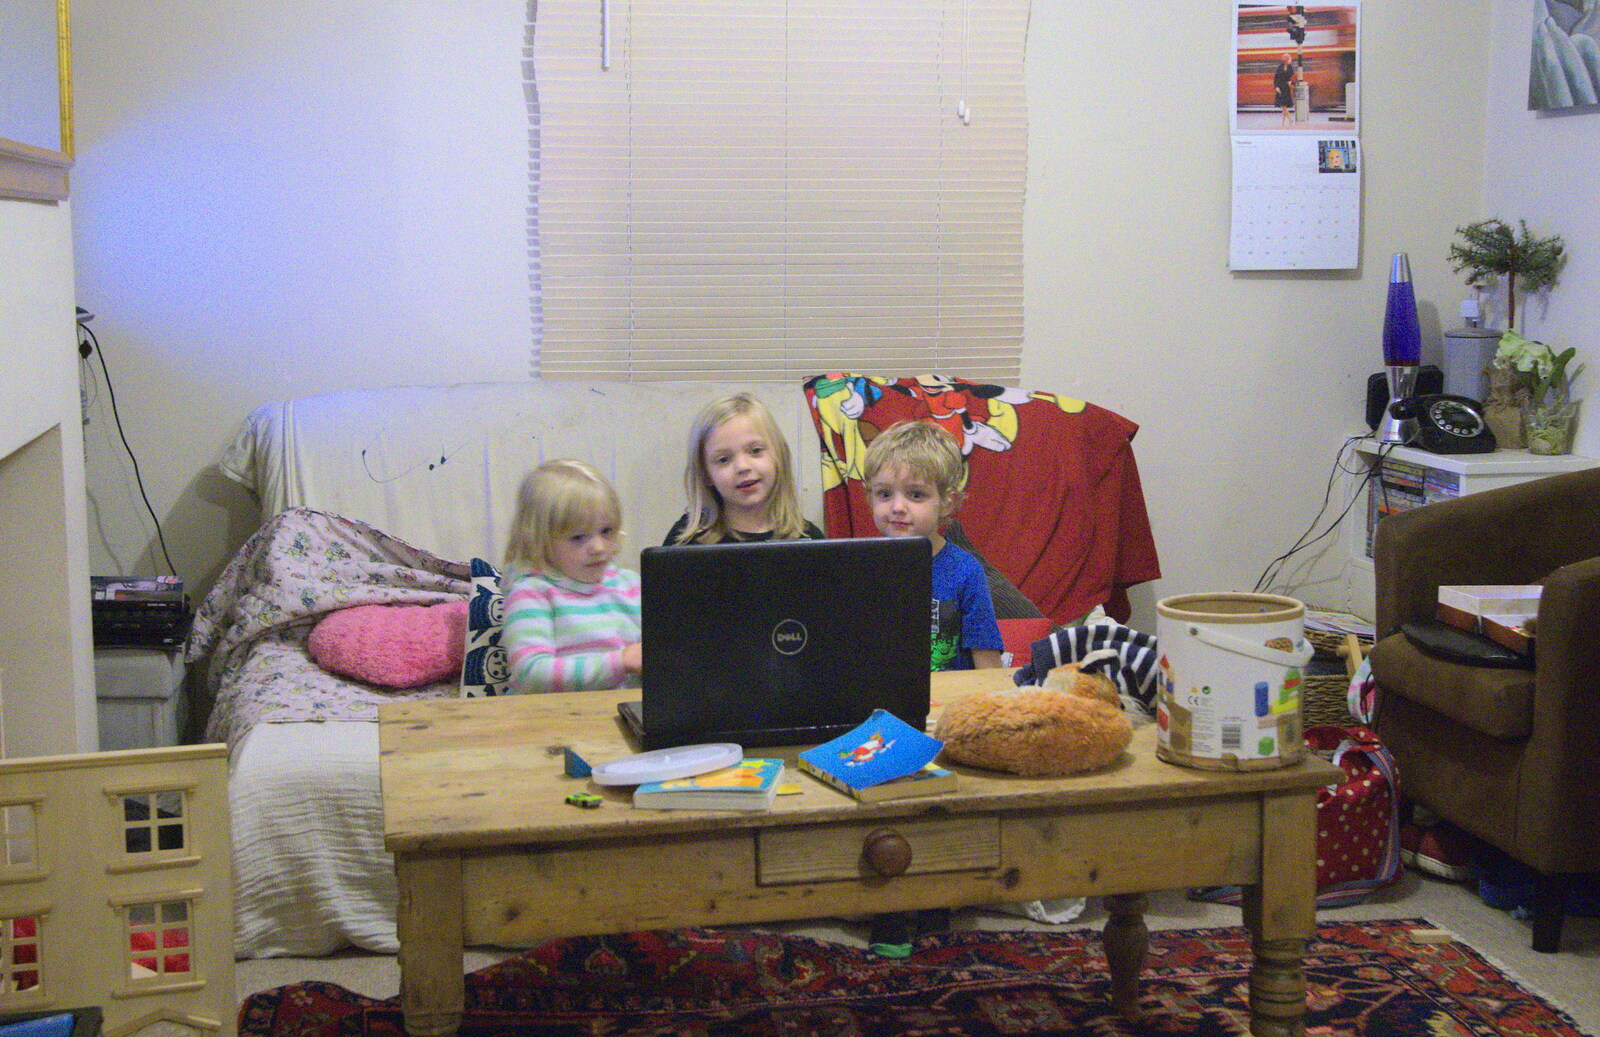 Norah, Lucy and Fred watch Octonauts on the laptop from A Rachel and Sam Evening, Gwydir Street, Cambridge - 19th October 2013